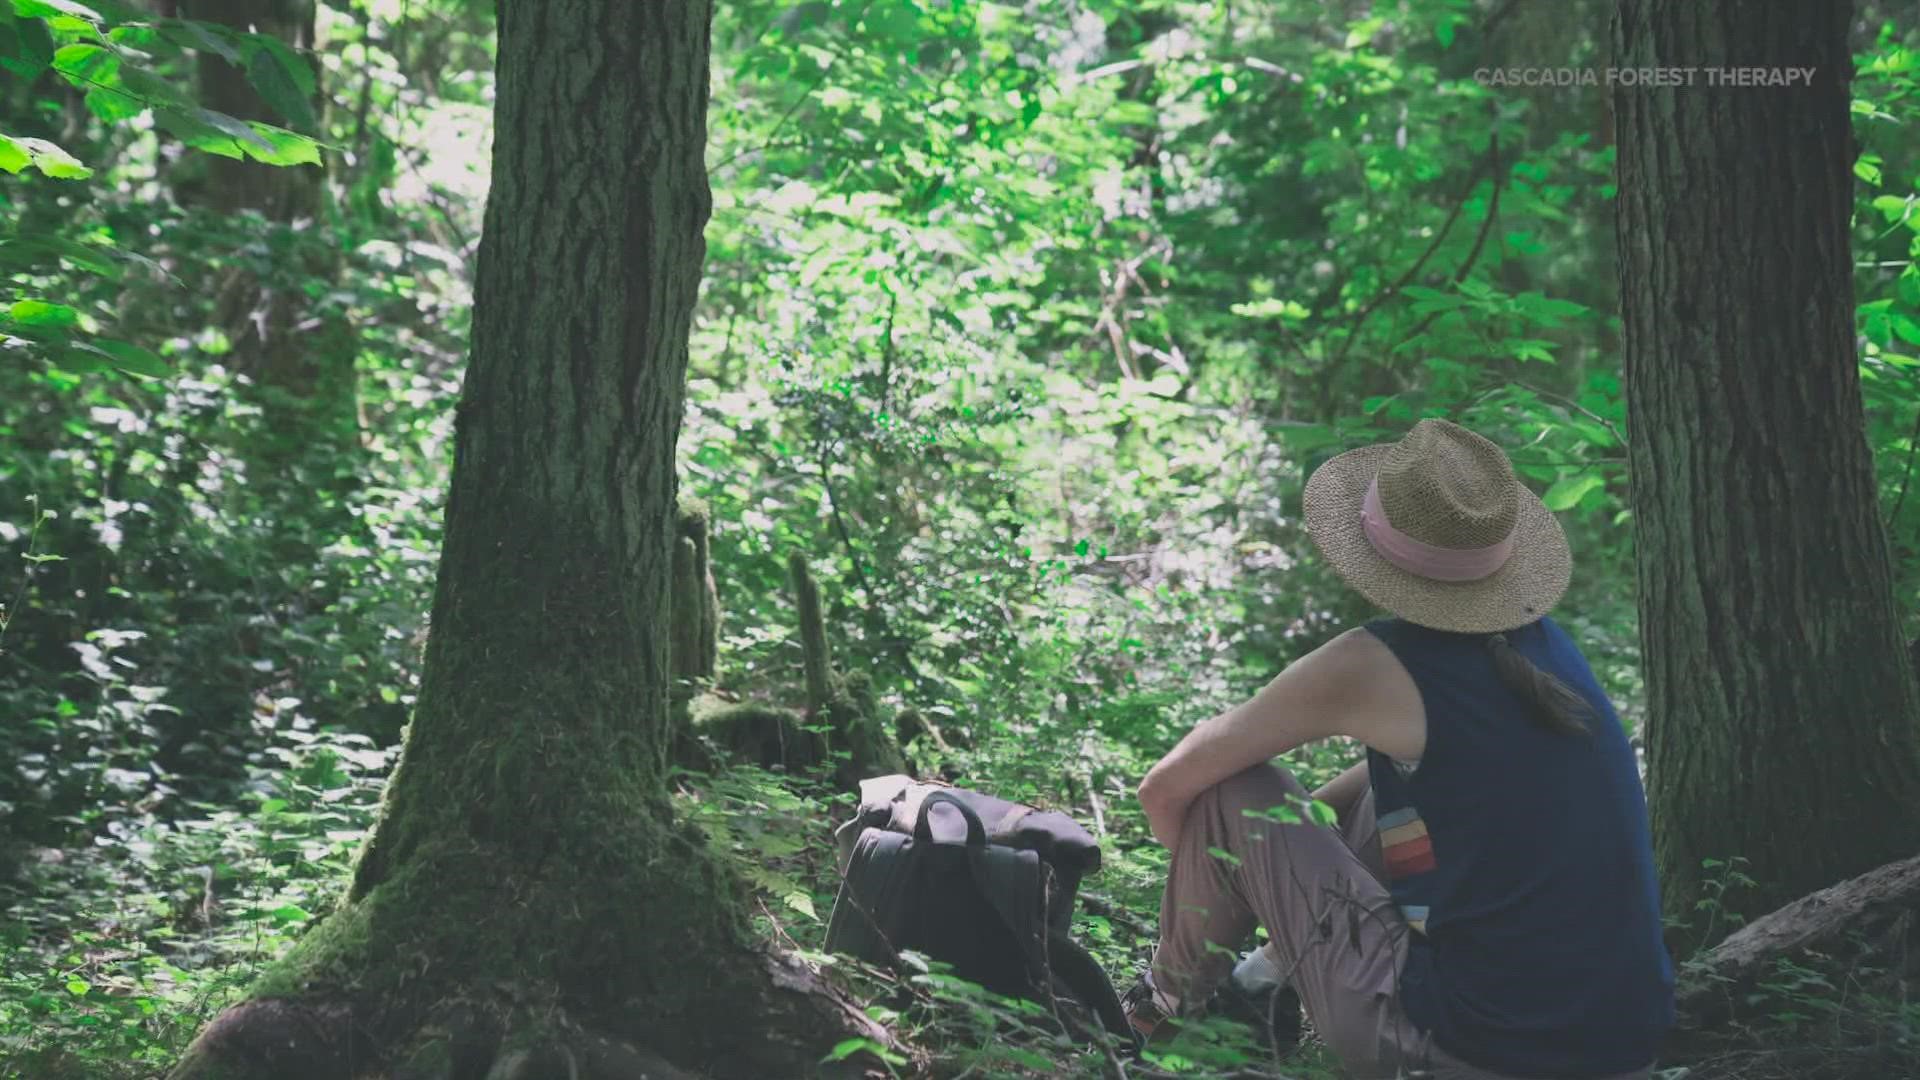 Cascadia Forest Therapy is a newly formed non-profit is encouraging more people to get out of the house, get out of your head and get into nature.